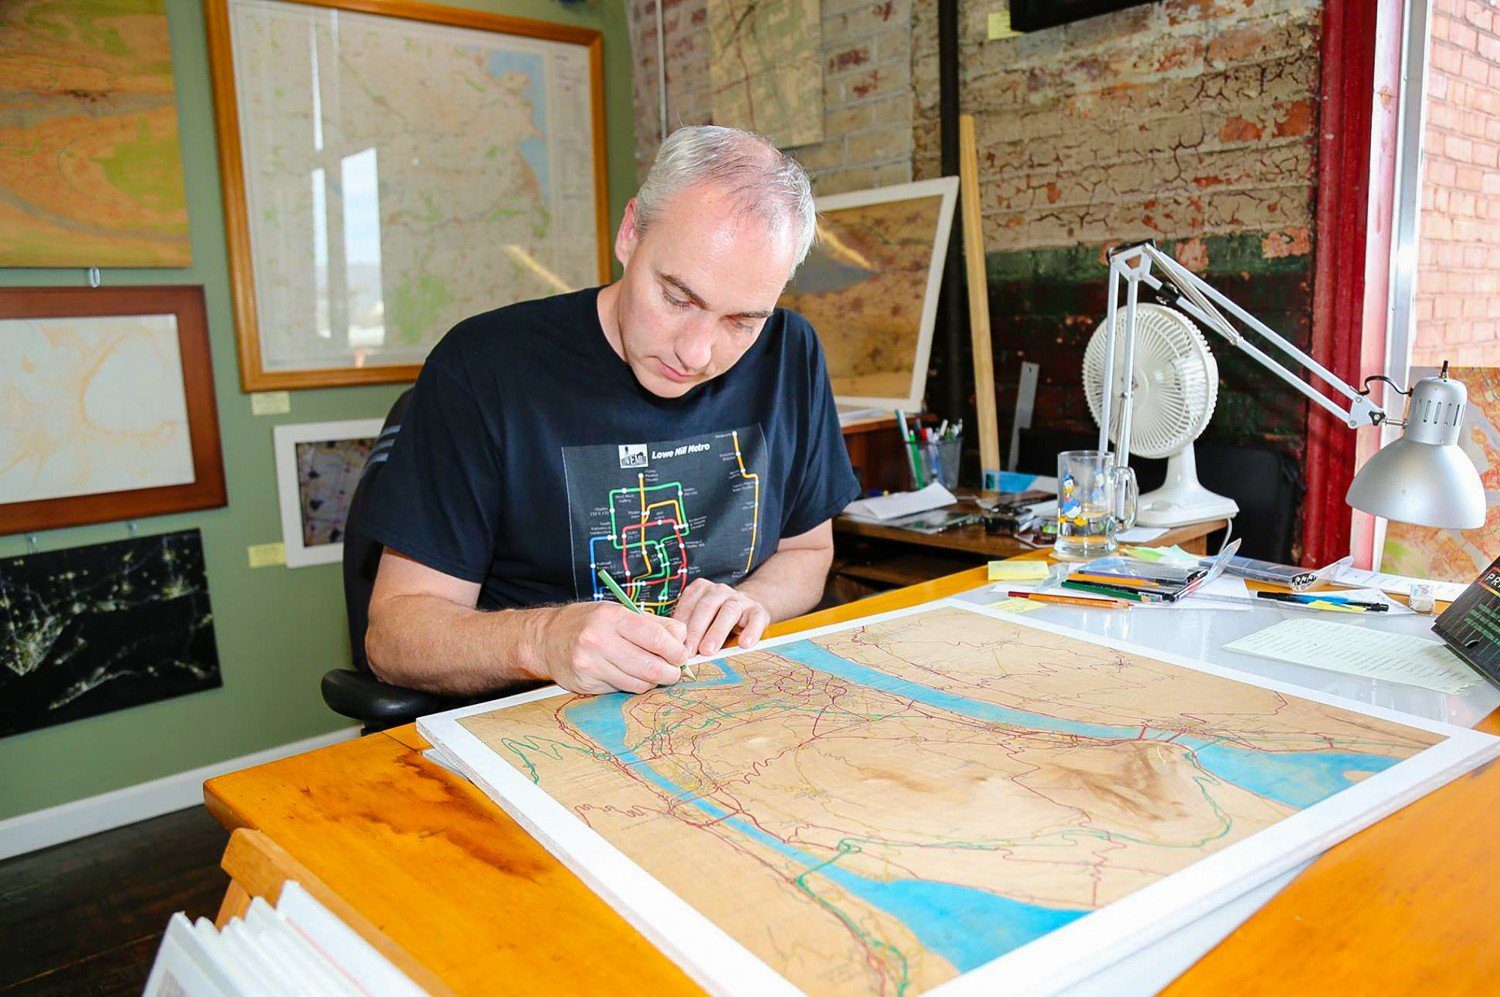 David in his studio, working on one of his maps.